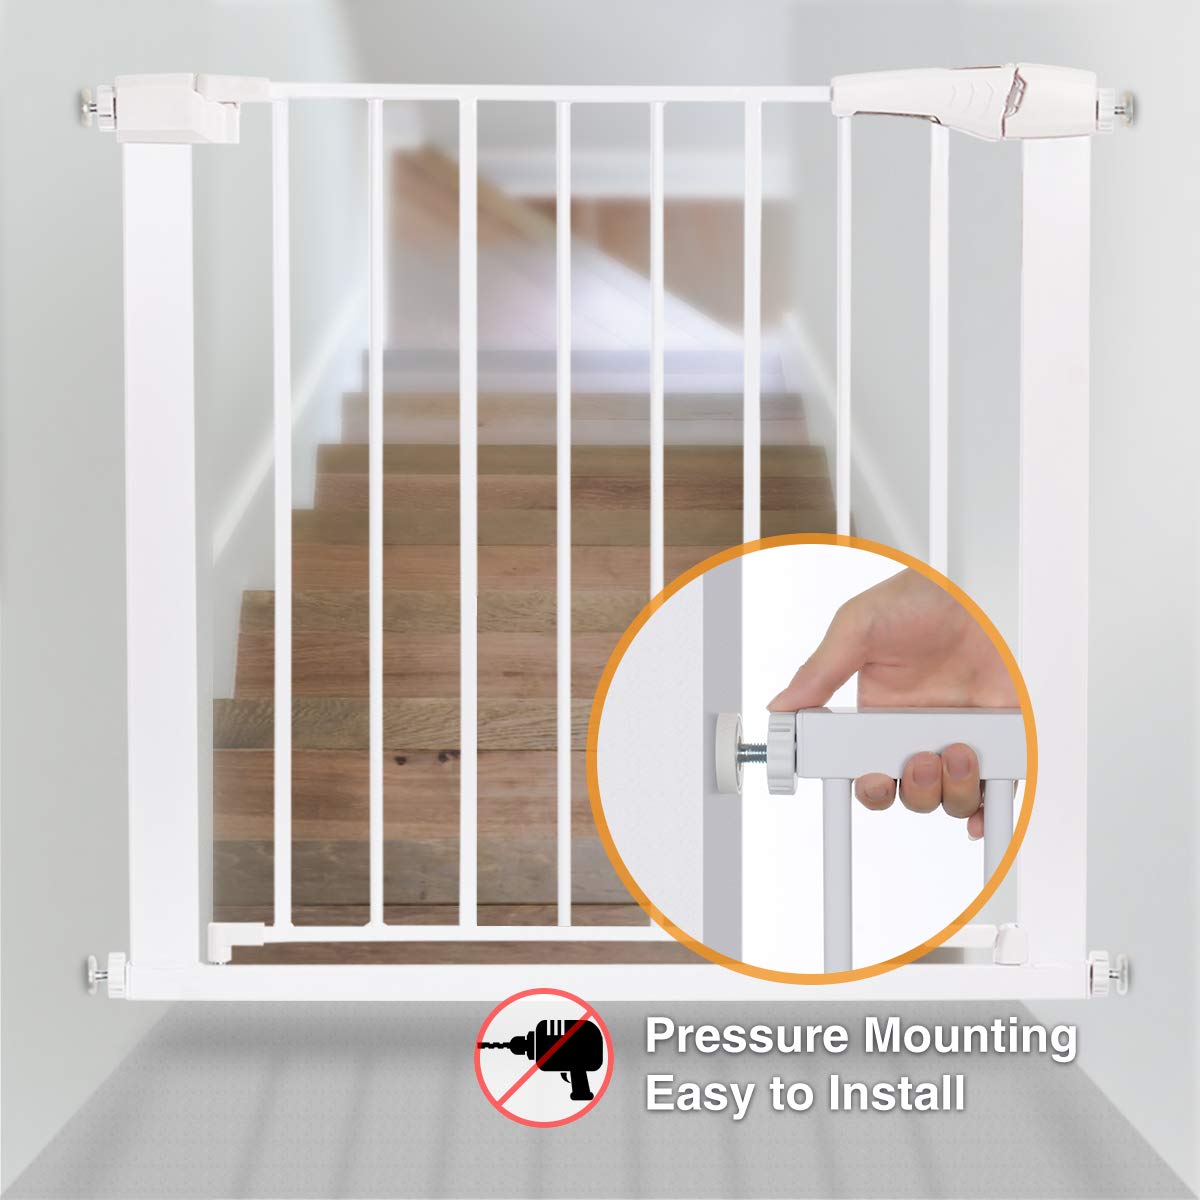 Comomy-Extra-Wide-Pet-Gate-for-Dog-Cat-Animal-Baby-Gate-Fence-Pens-with-Swing-Door-Kids-Play-Gate-30-1900433-2